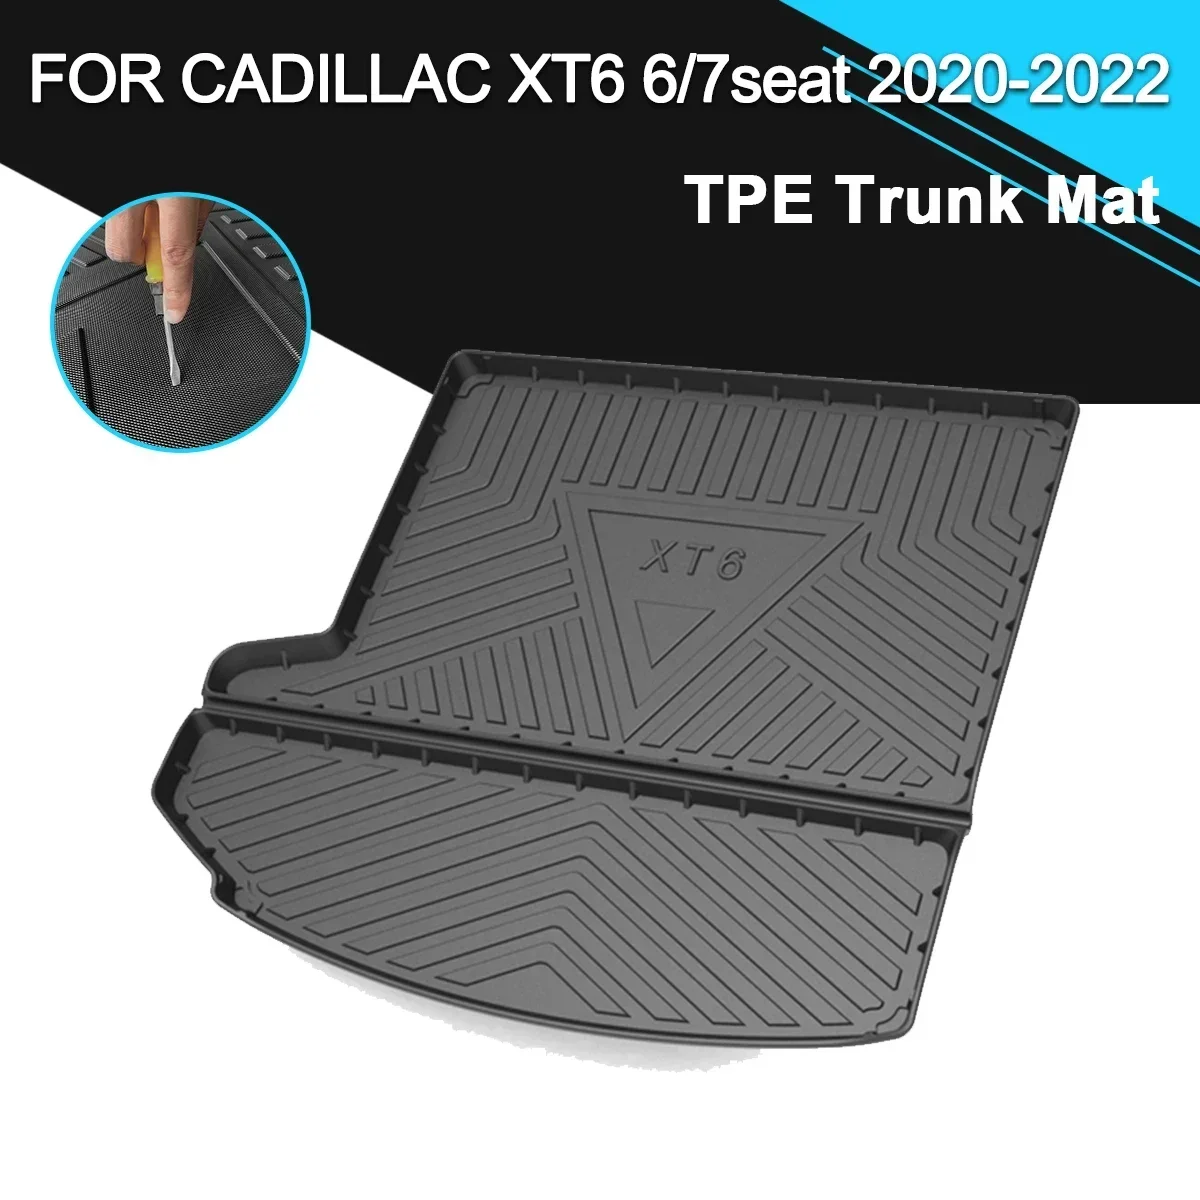 

Car Rear Trunk Cover Mat Non-Slip Waterproof Rubber TPE Cargo Liner Accessories For Cadillac XT6 6/7 Seater 2020-2022